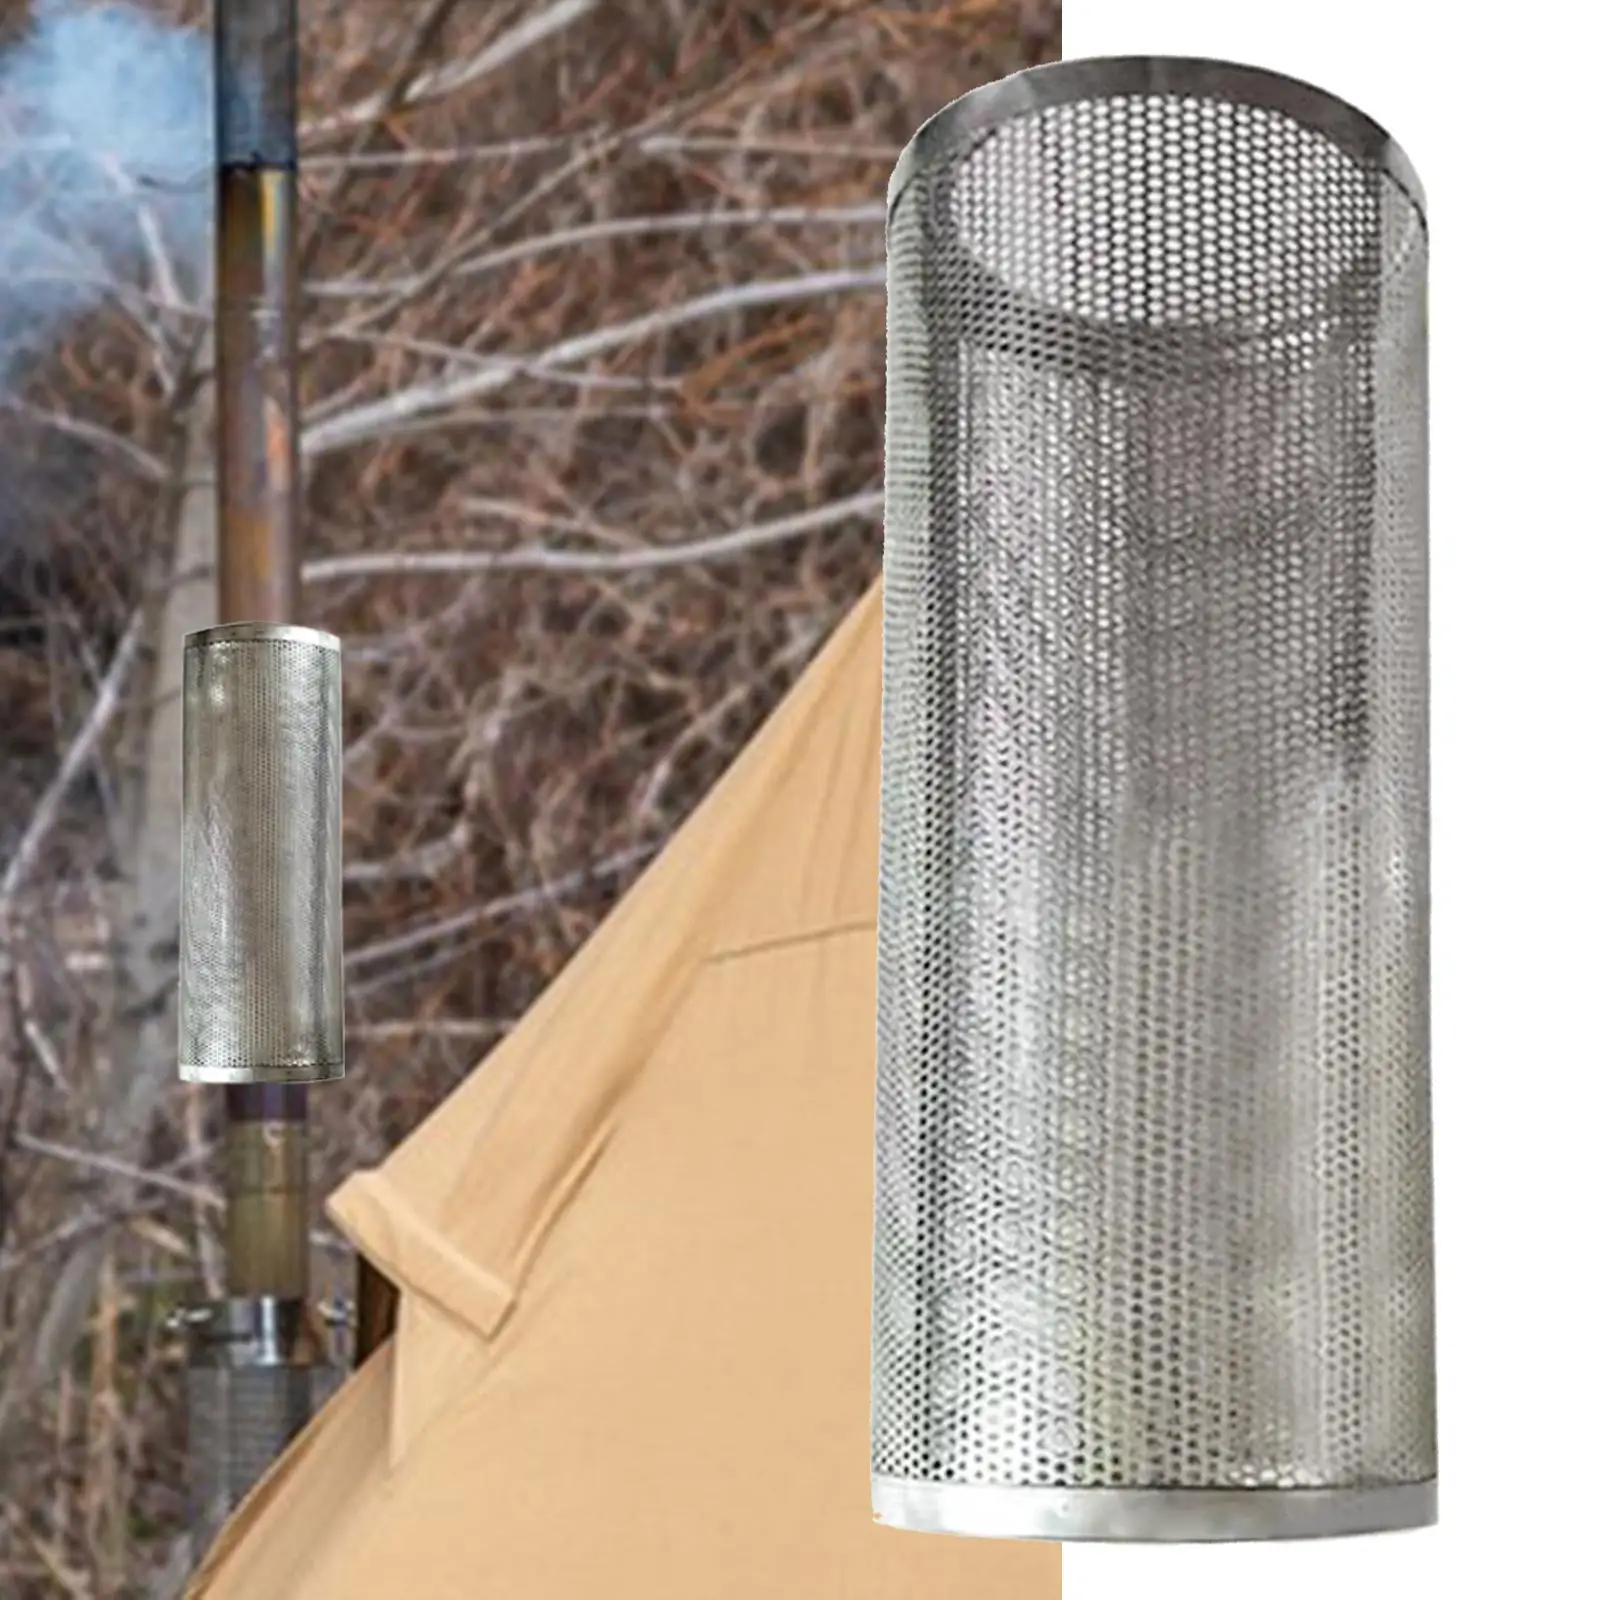 Chimney Spark Arrestor Durable Heat Resistant Stove Pipe Mesh Chimney Tube Filter Screen for Winter Heater Camping Furnace